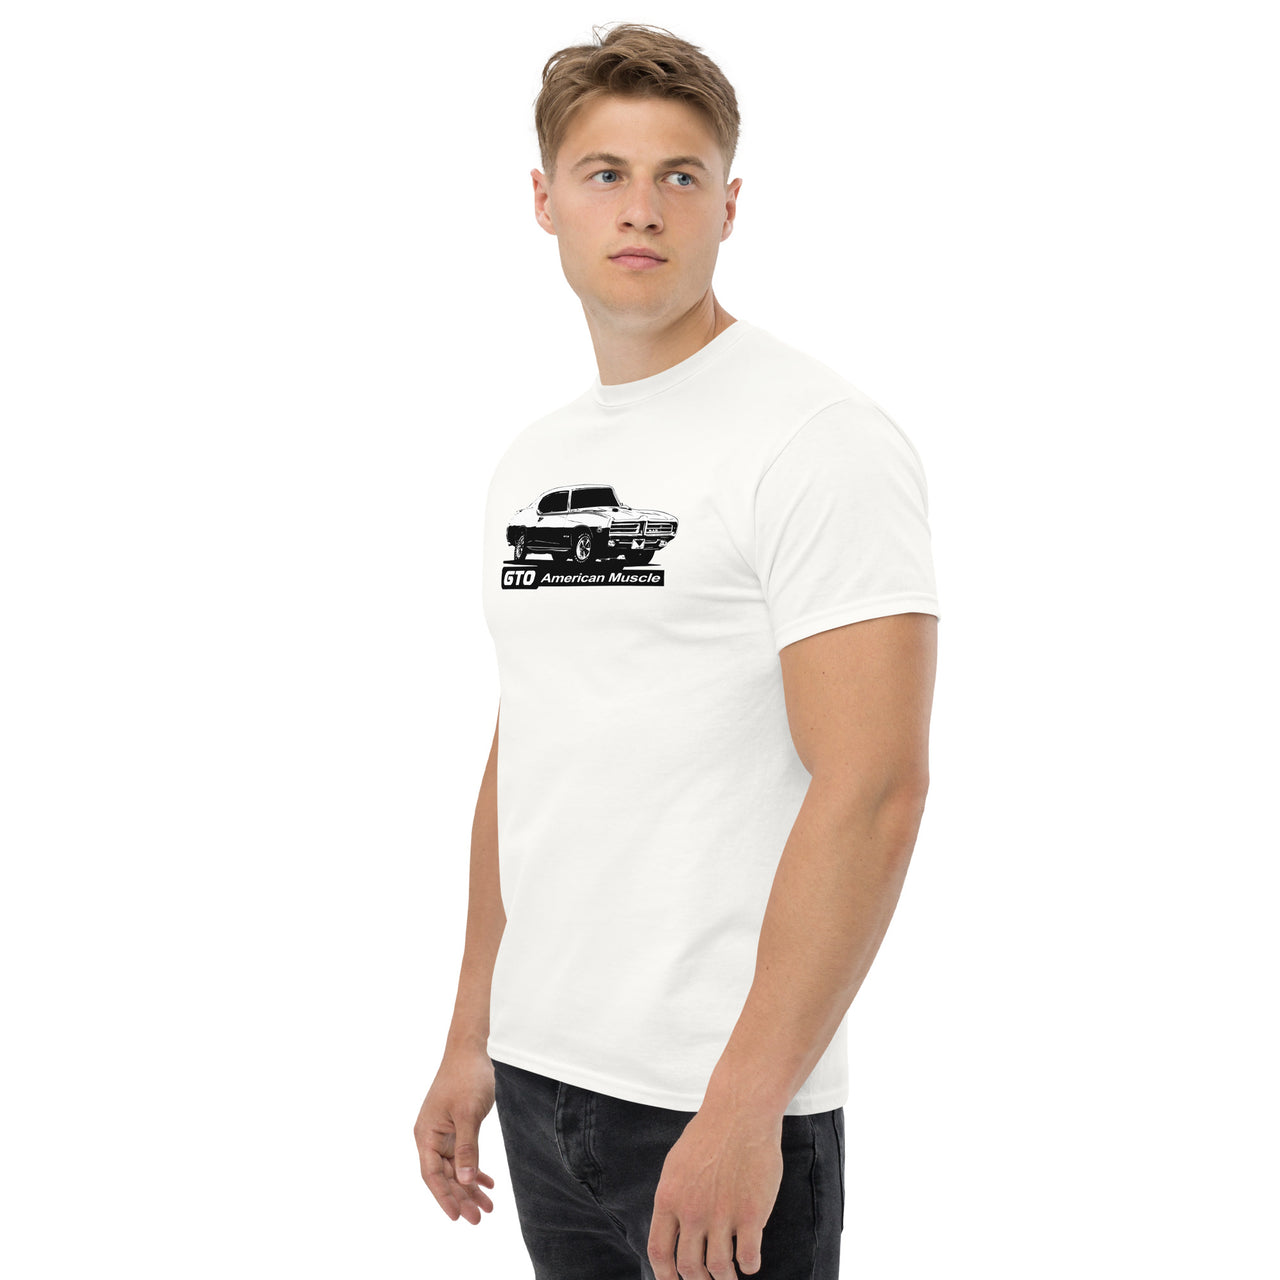 1969 GTO T-Shirt modeled in white